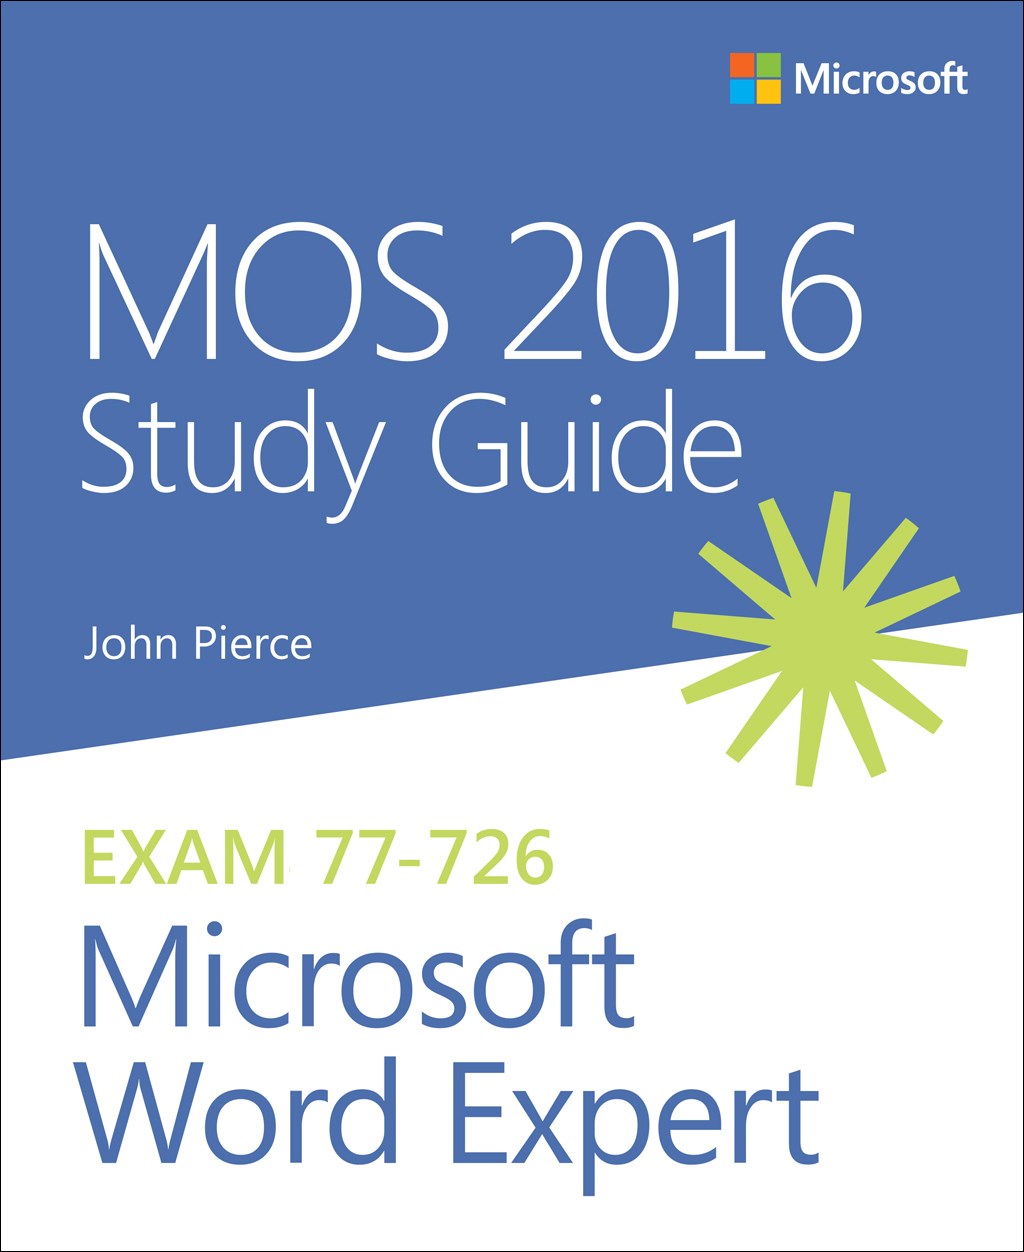 MOS 2016 Study Guide for Microsoft Word Expert